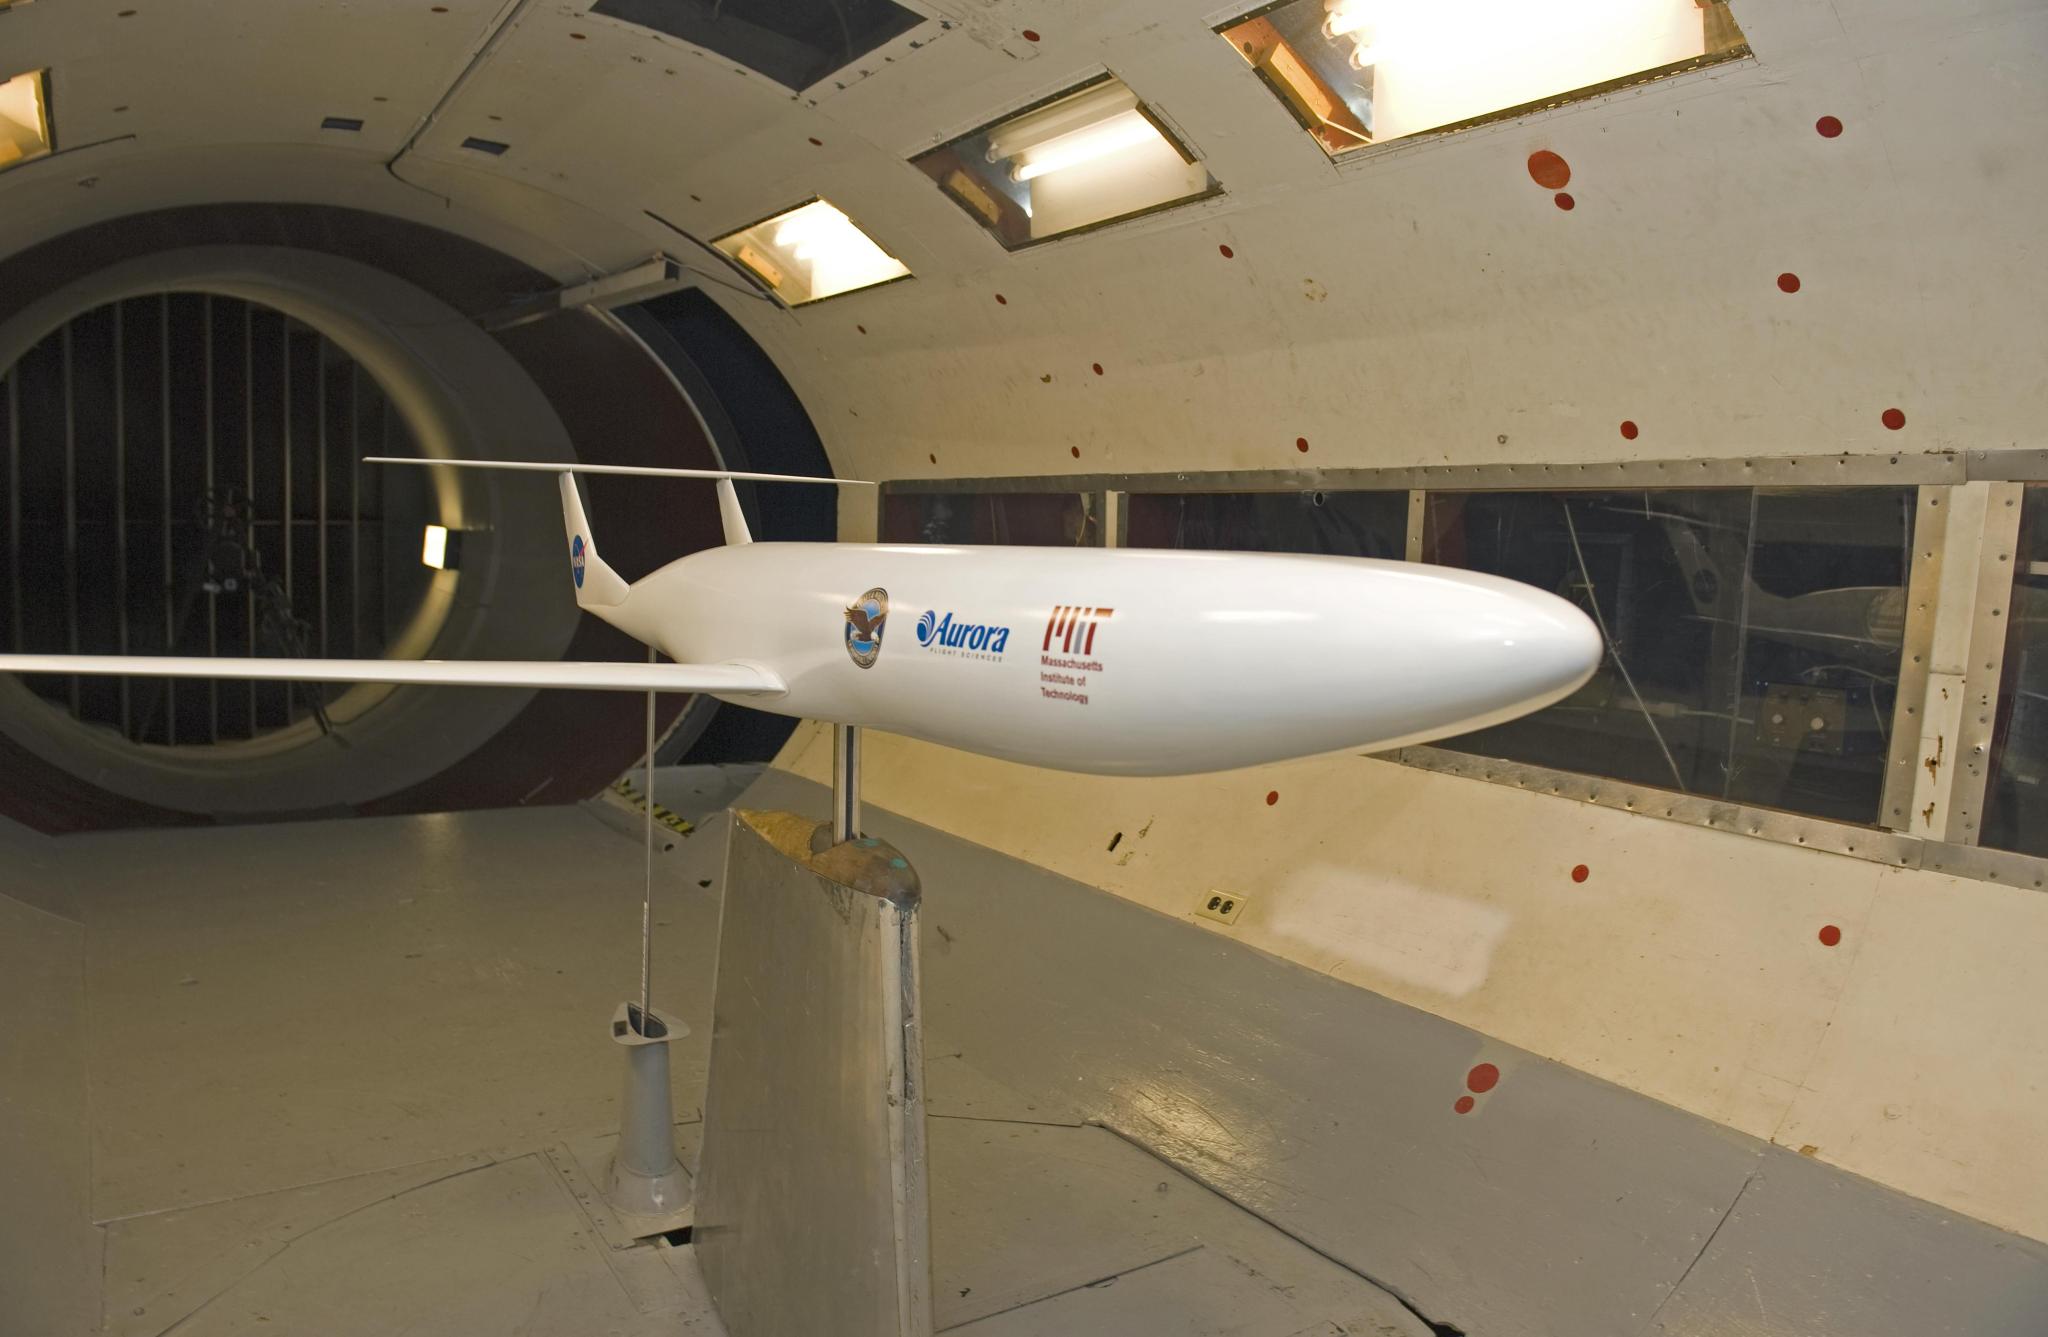 the D8 or "double bubble" is now a subscale model being tested in a wind tunnel at MIT.